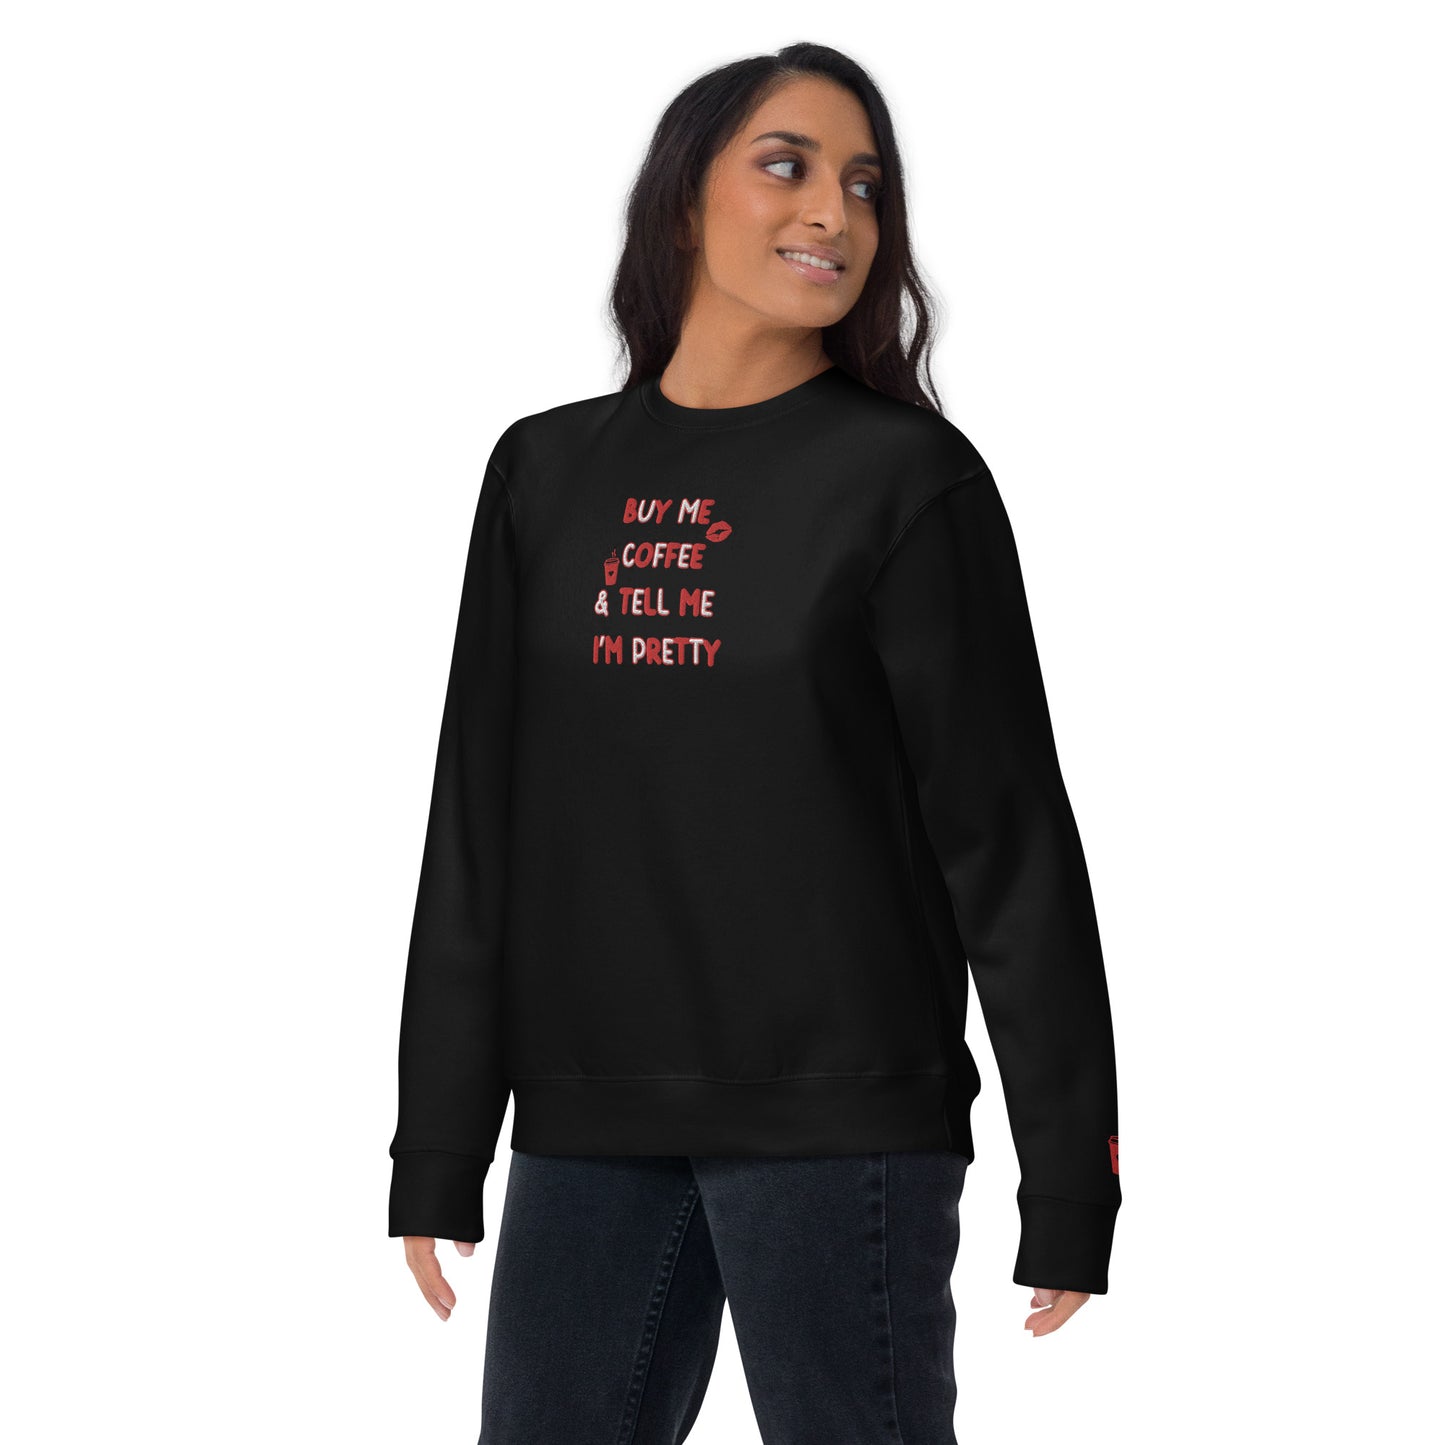 Buy Me Coffee and Tell Me I'm Pretty - Embroidered Crewneck Sweatshirt by The Banannie Diaries